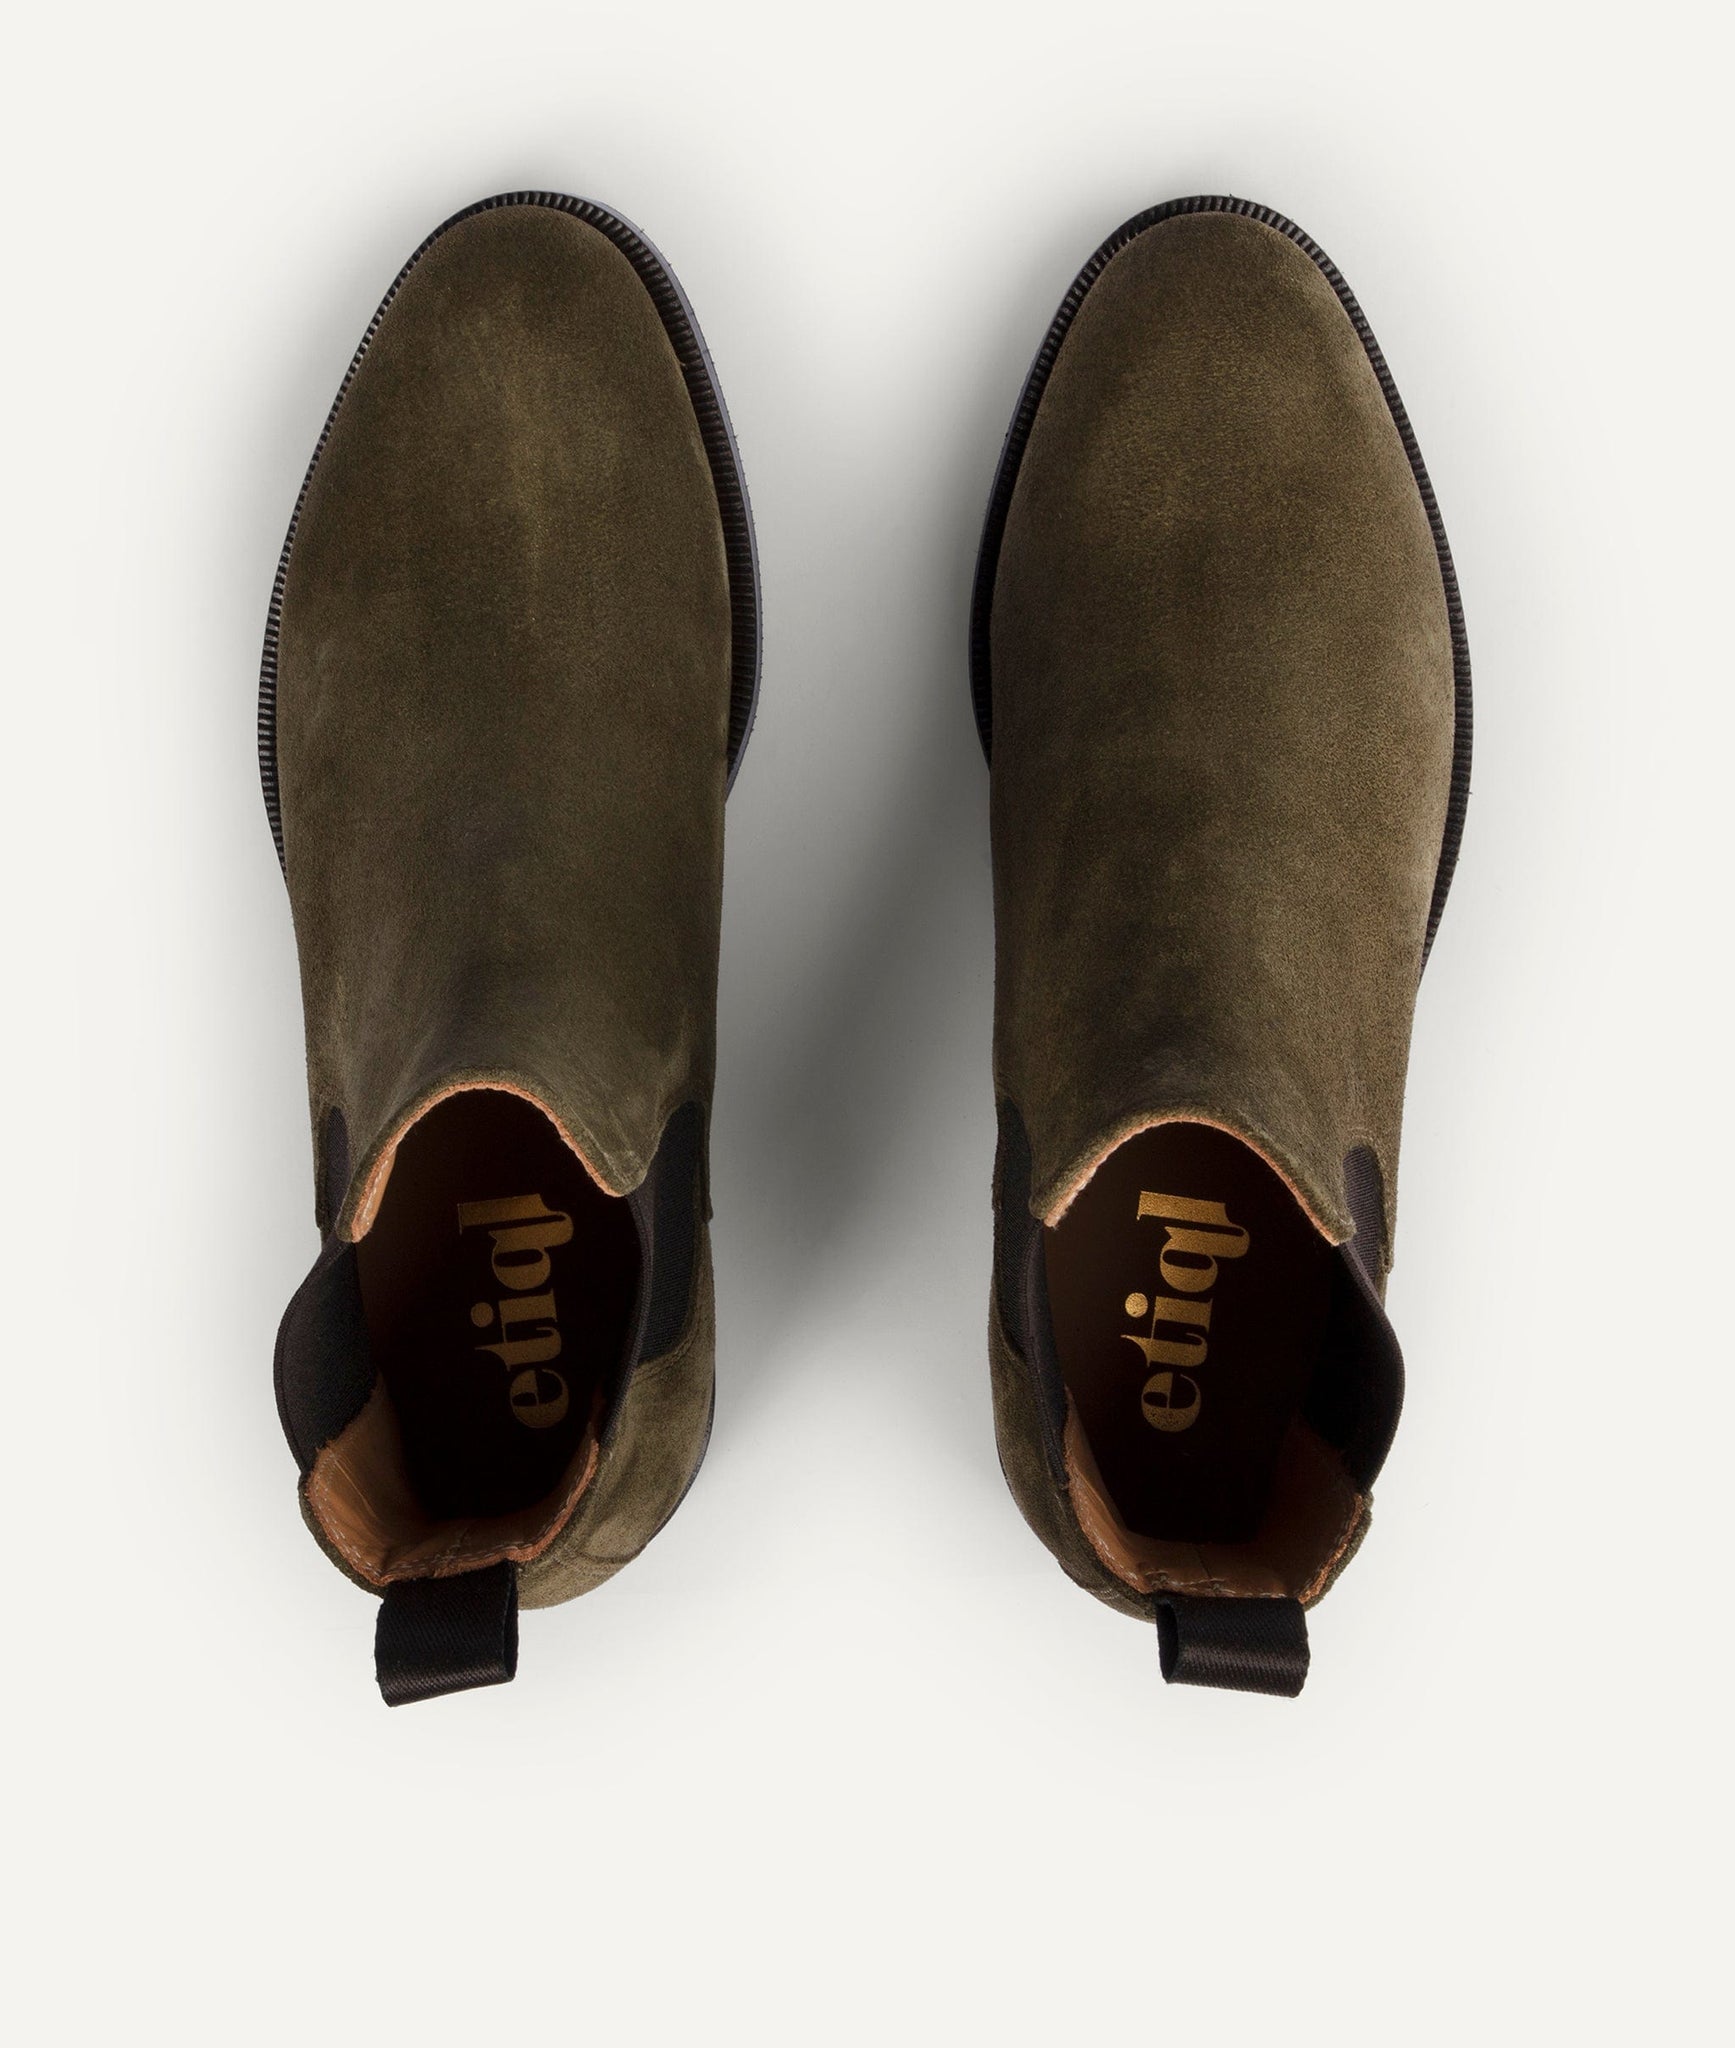 Classic Chelsea Boot in Suede